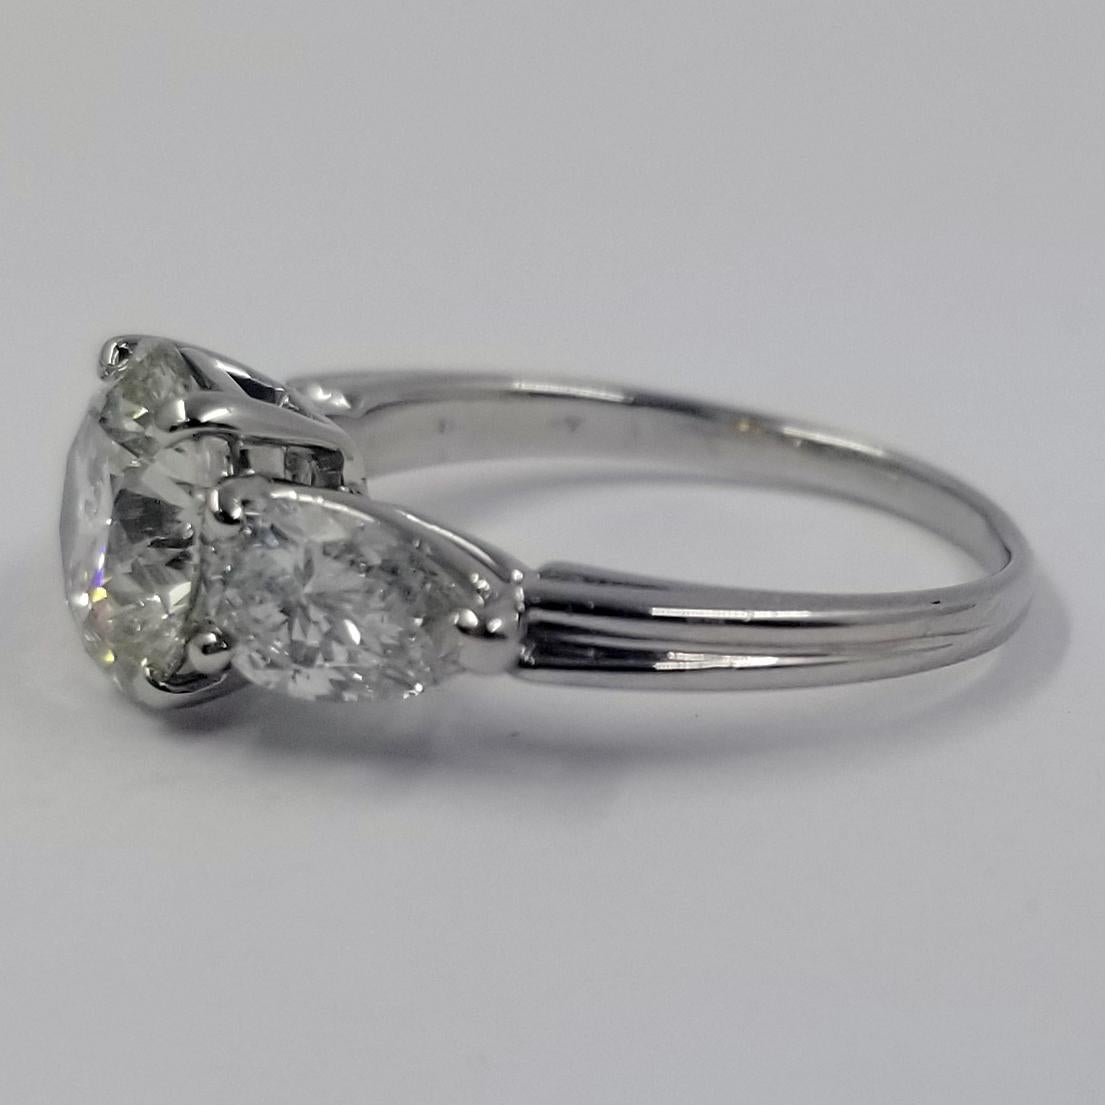 Platinum Engagement Ring Featuring A 2.05 Carat Round Brilliant Diamond Centerstone. The Diamond is GIA Graded as I1 Clarity & L Color, Report Number 6204888775. The Ring Also Contains 2 Pear Shaped Diamonds Totaling Approximately 1 Carat with SI1